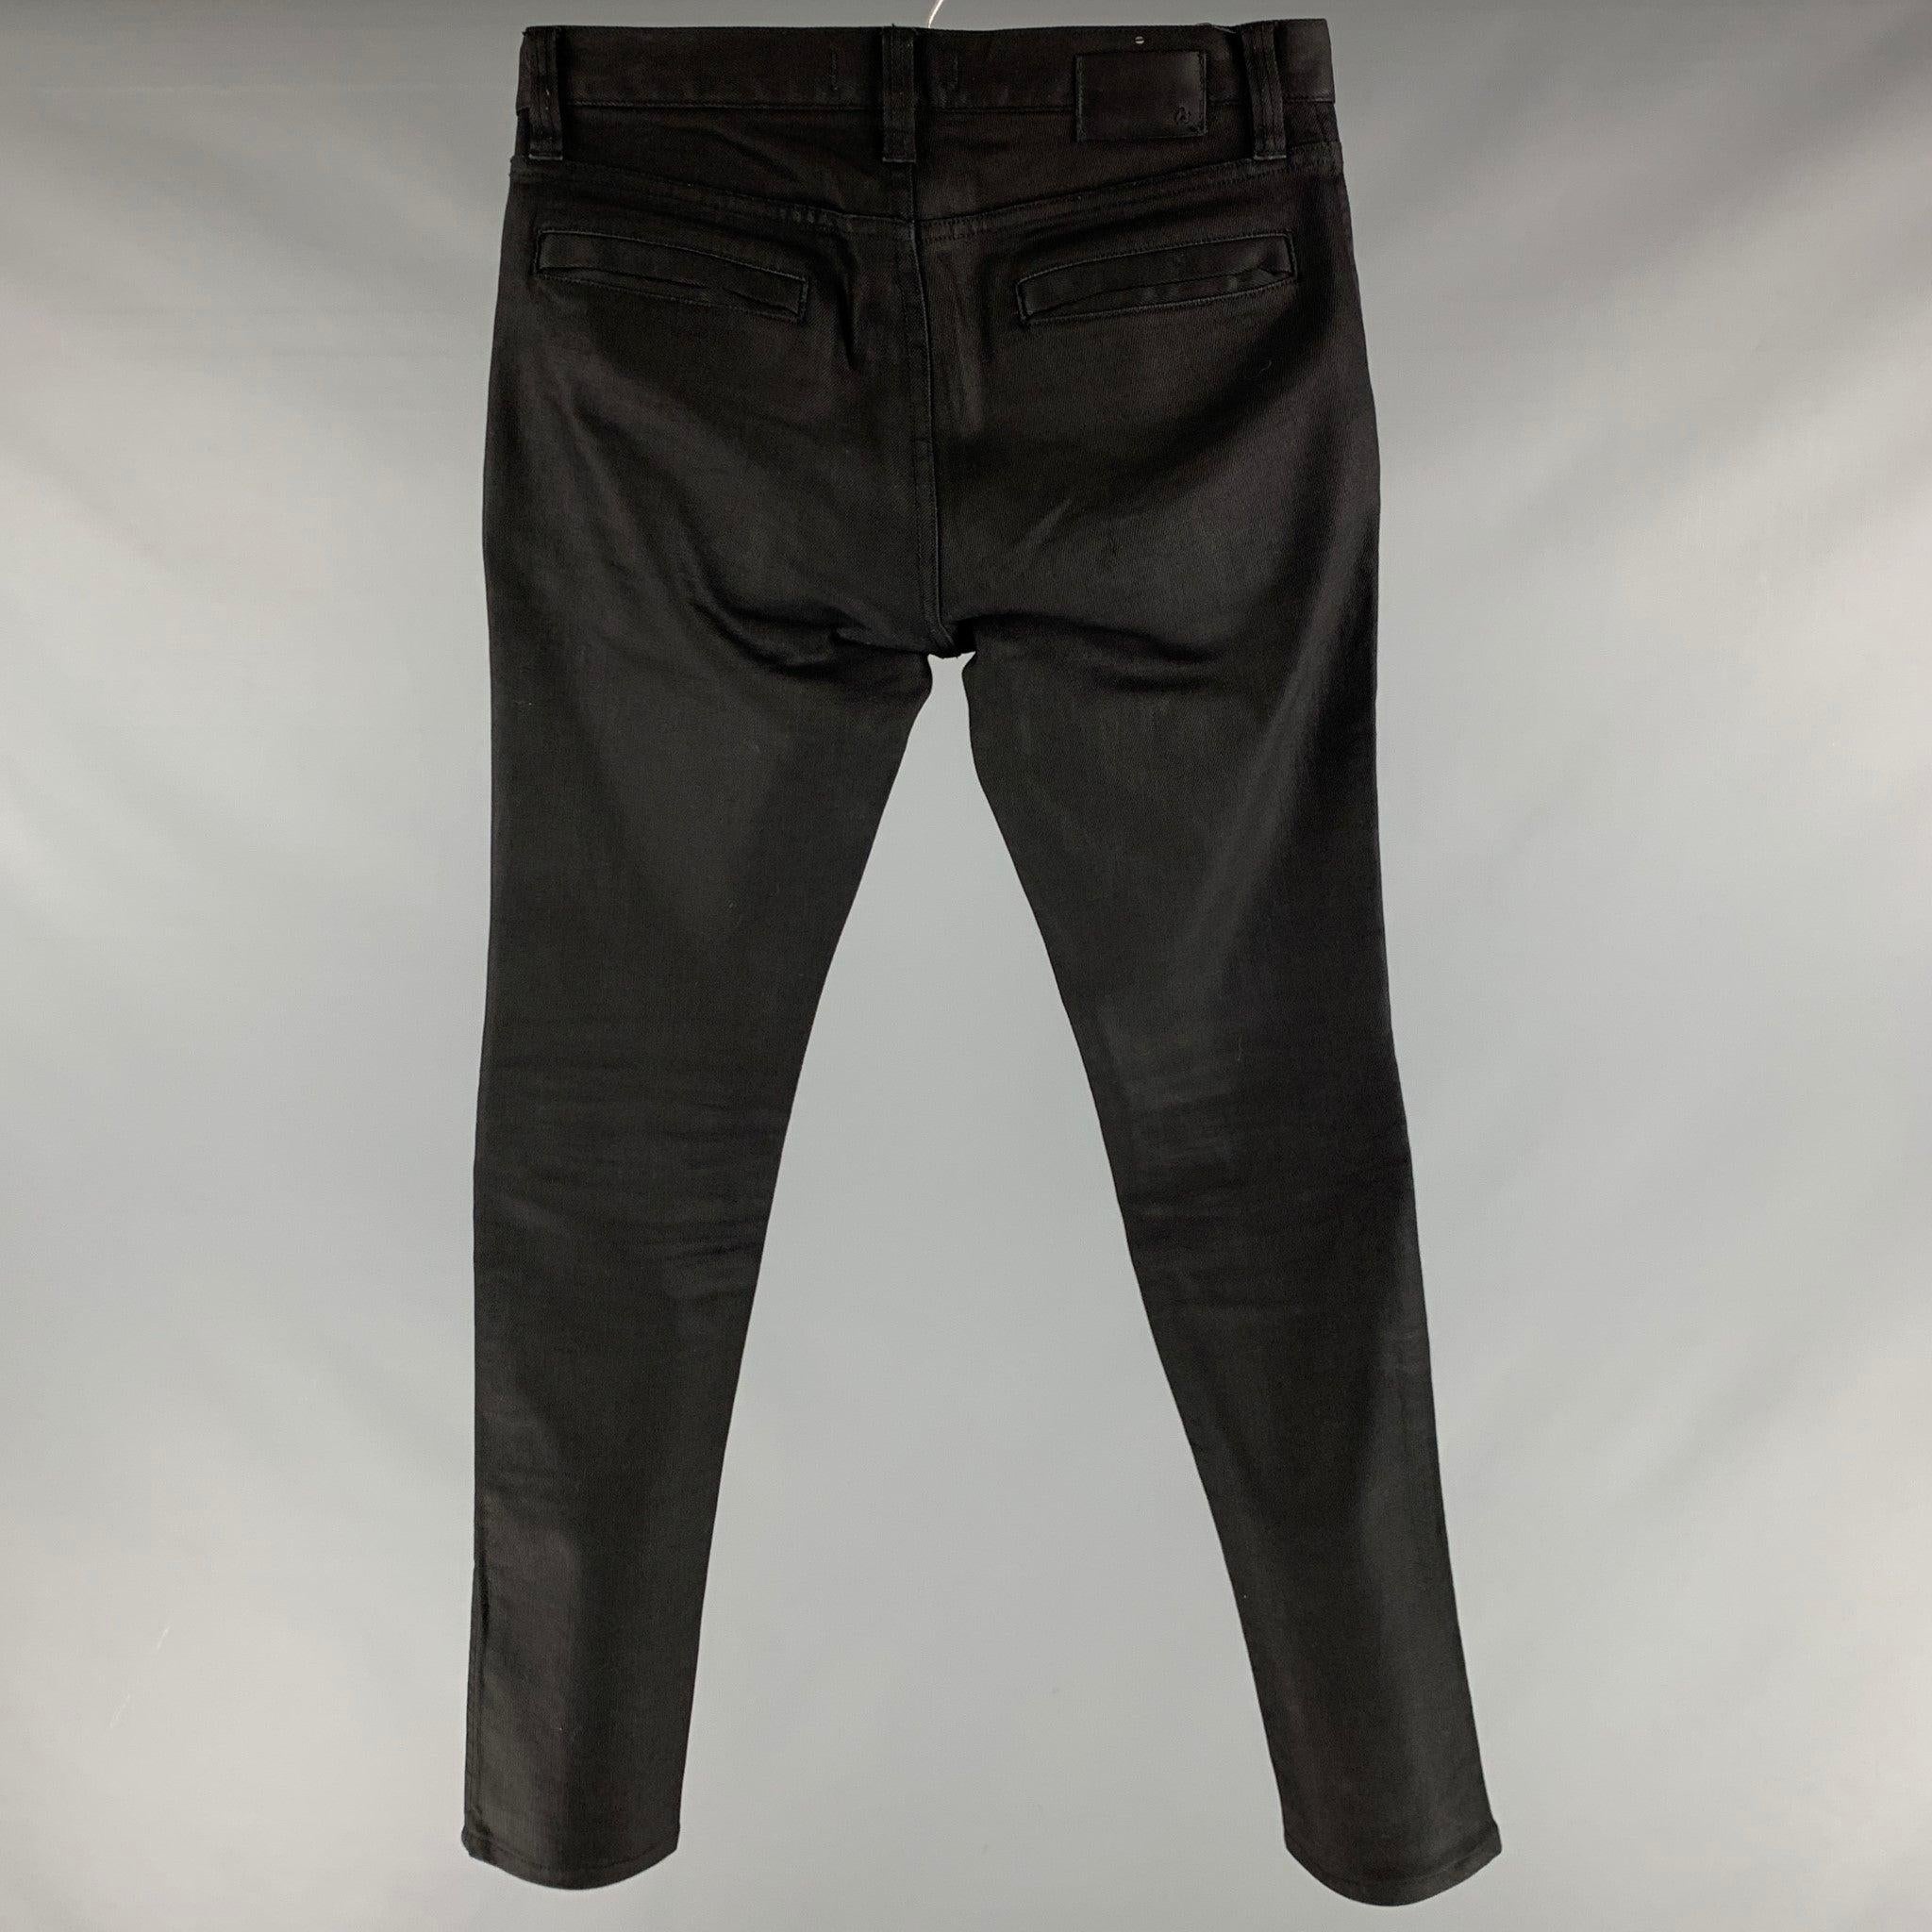 JOHN VARVATOS * U.S.A. jeans
in a black cotton blend fabric featuring two pockets with zippers, knee details, and zip fly closure.Very Good Pre-Owned Condition. Minor signs of wear. 

Marked:   30 

Measurements: 
  Waist: 30 inches Rise: 8 inches